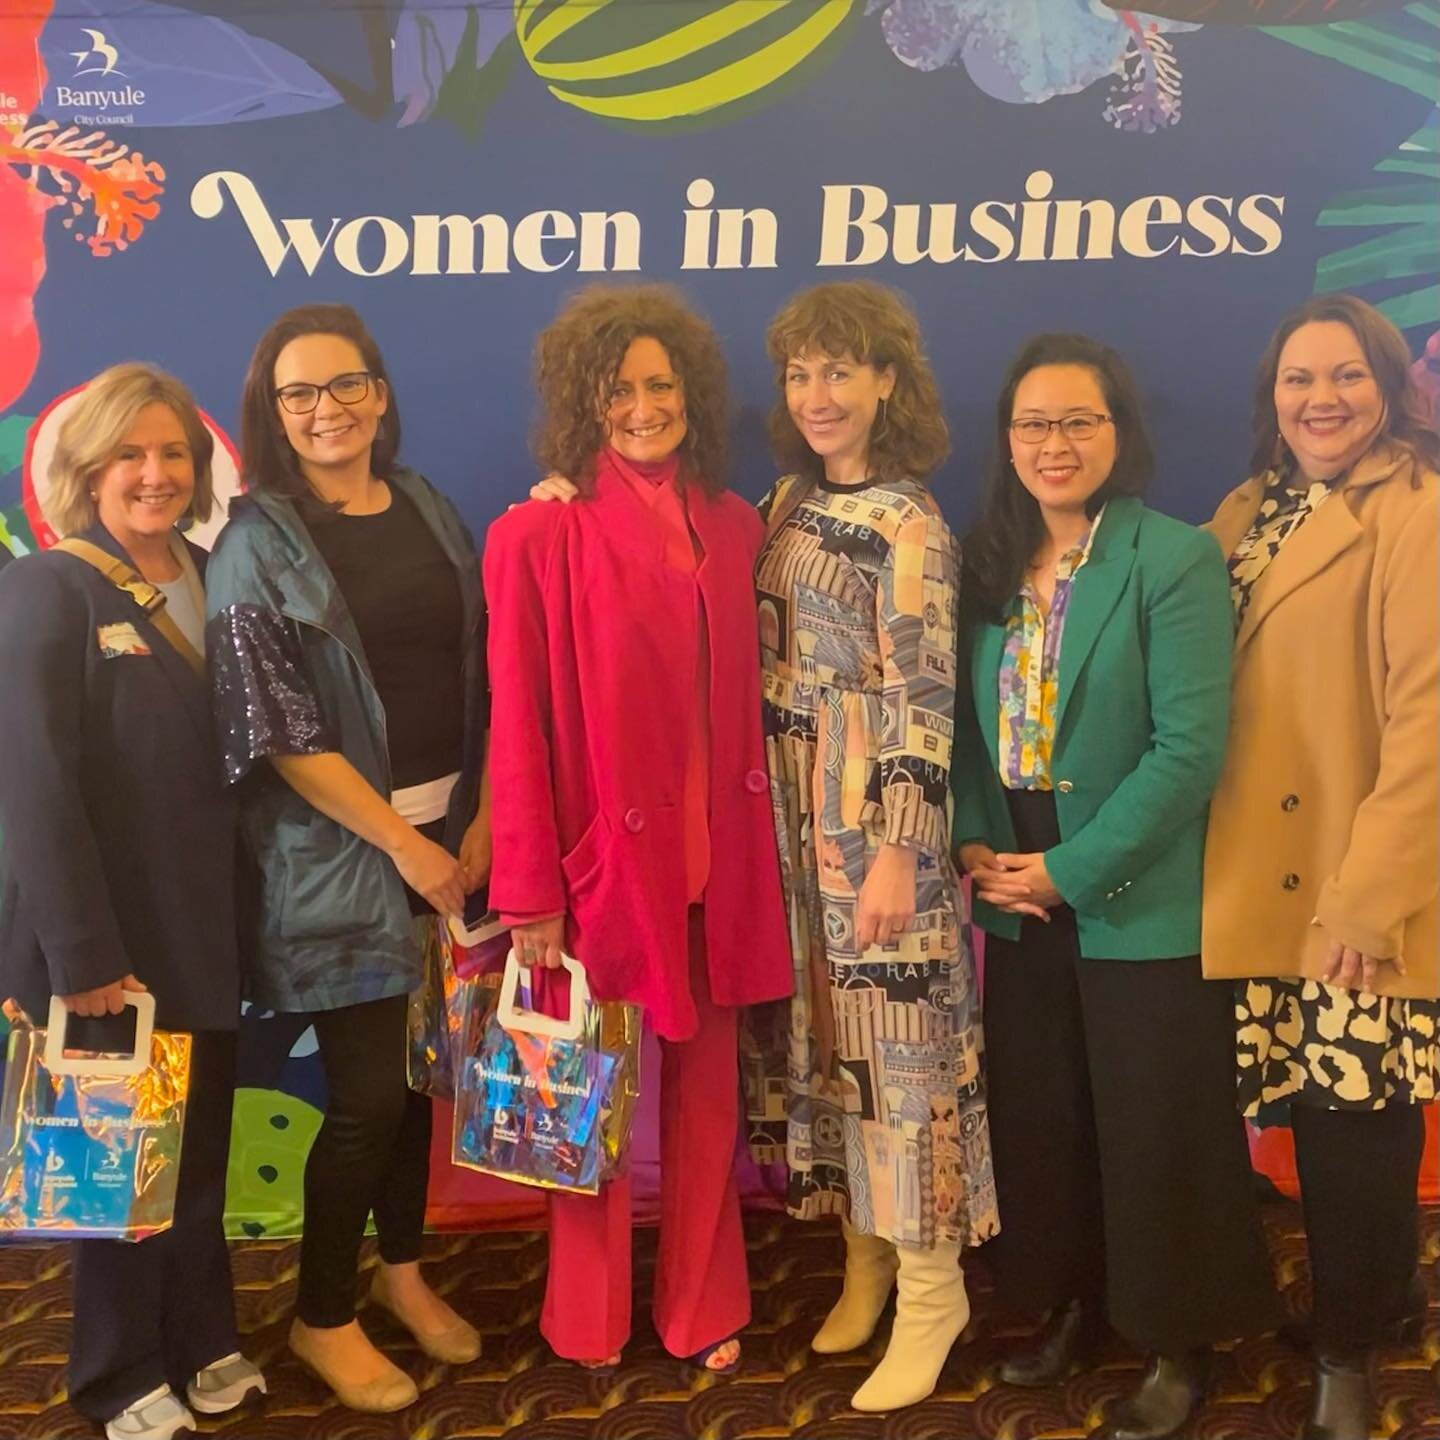 Women in Business Lunch with Lisa Gorman 🌺 Team bonding with @bstan78 with an inspirational talk from fashion designer Lisa @gormanclothing 

Lisa was a nurse at RMH, who passed by the @marianahardwick bridal boutique &amp; saw an ad for a retail tr